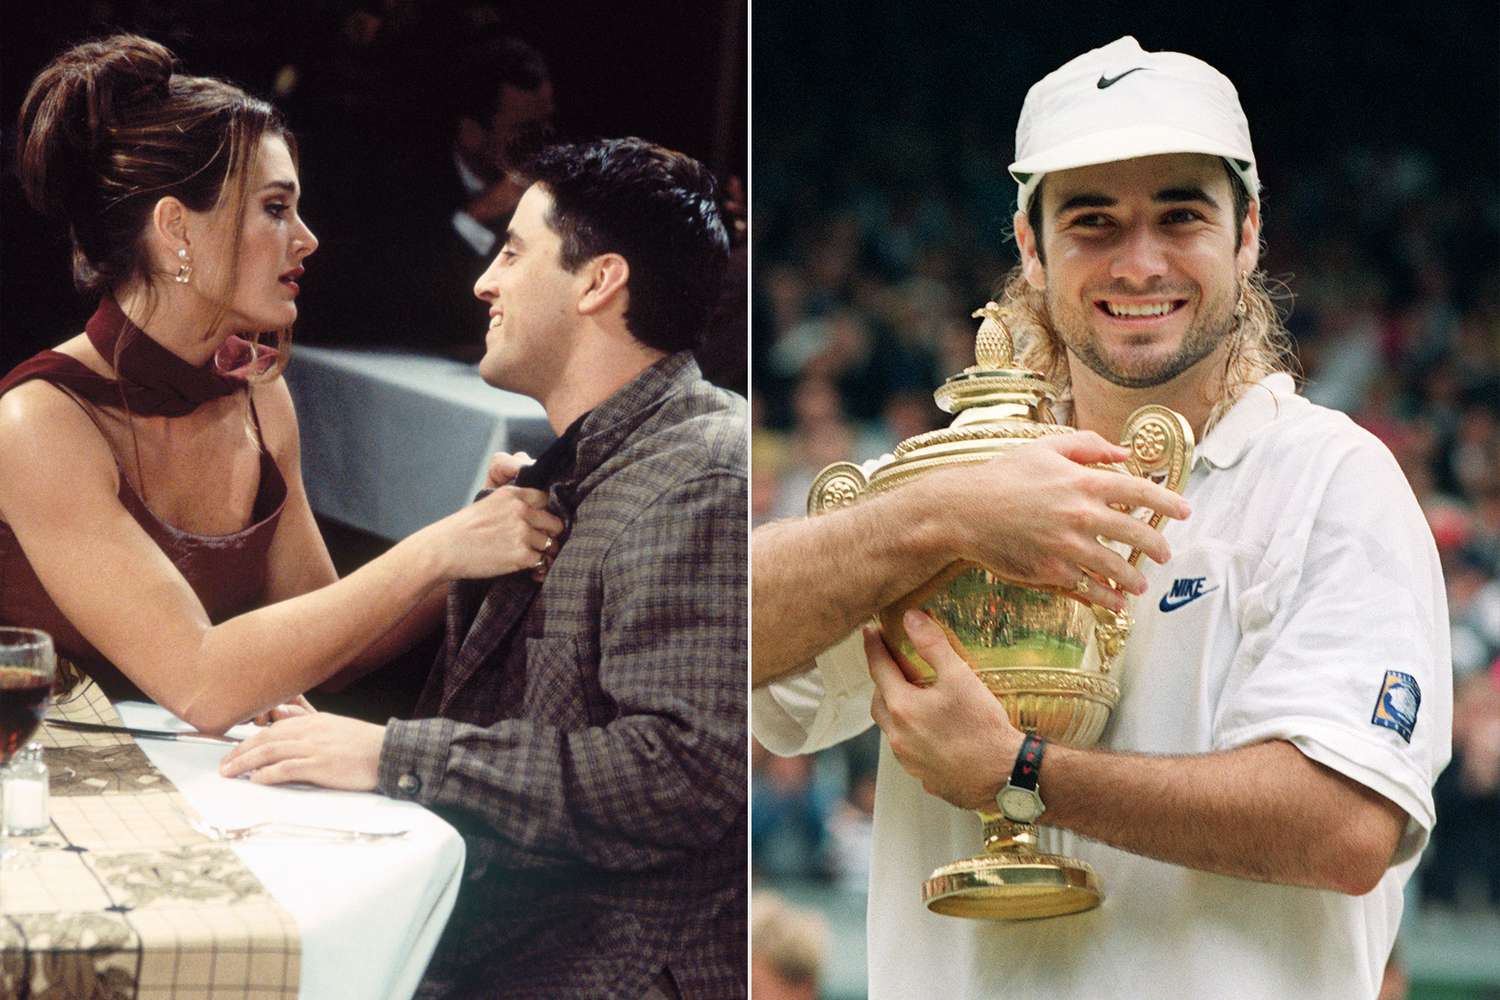 Brooke Shields recalls Andre Agassi breaking trophies over ‘Friends’ role